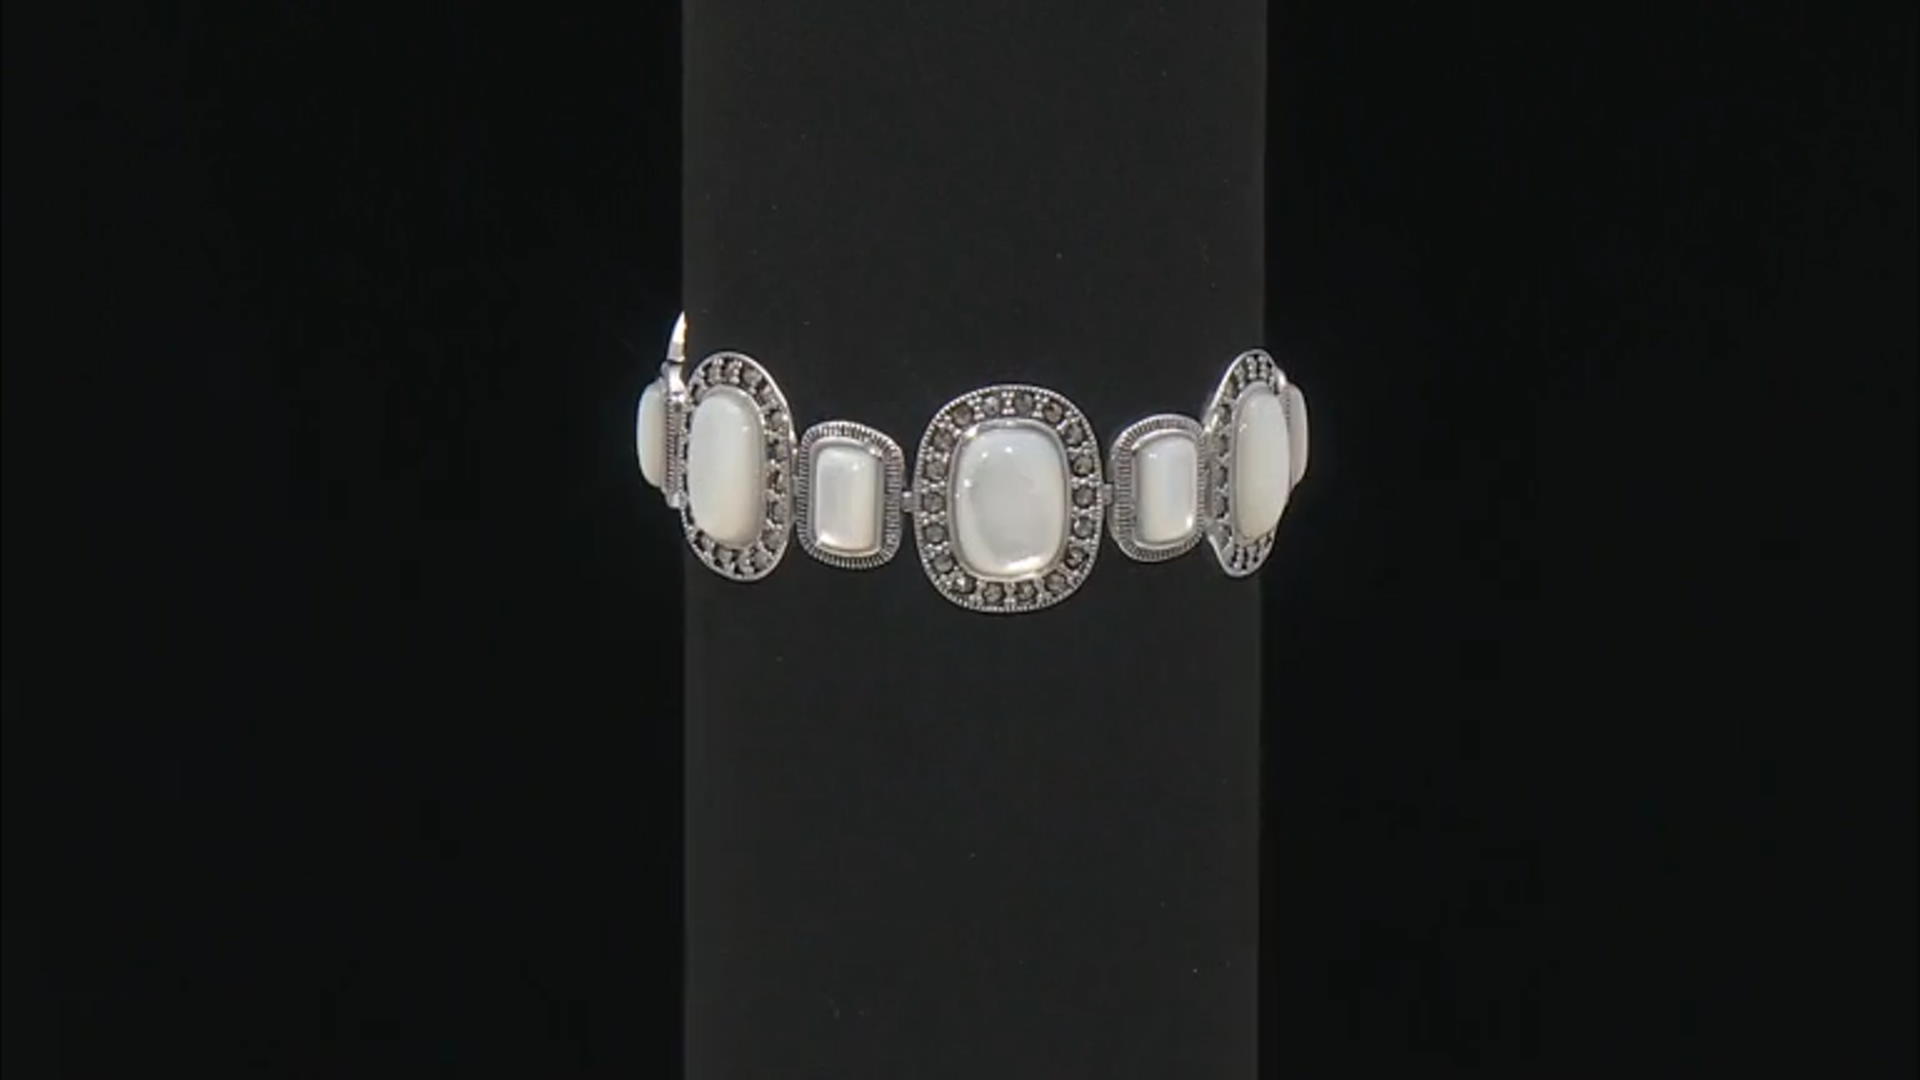 White mother-of-pearl rhodium over sterling silver bracelet Video Thumbnail